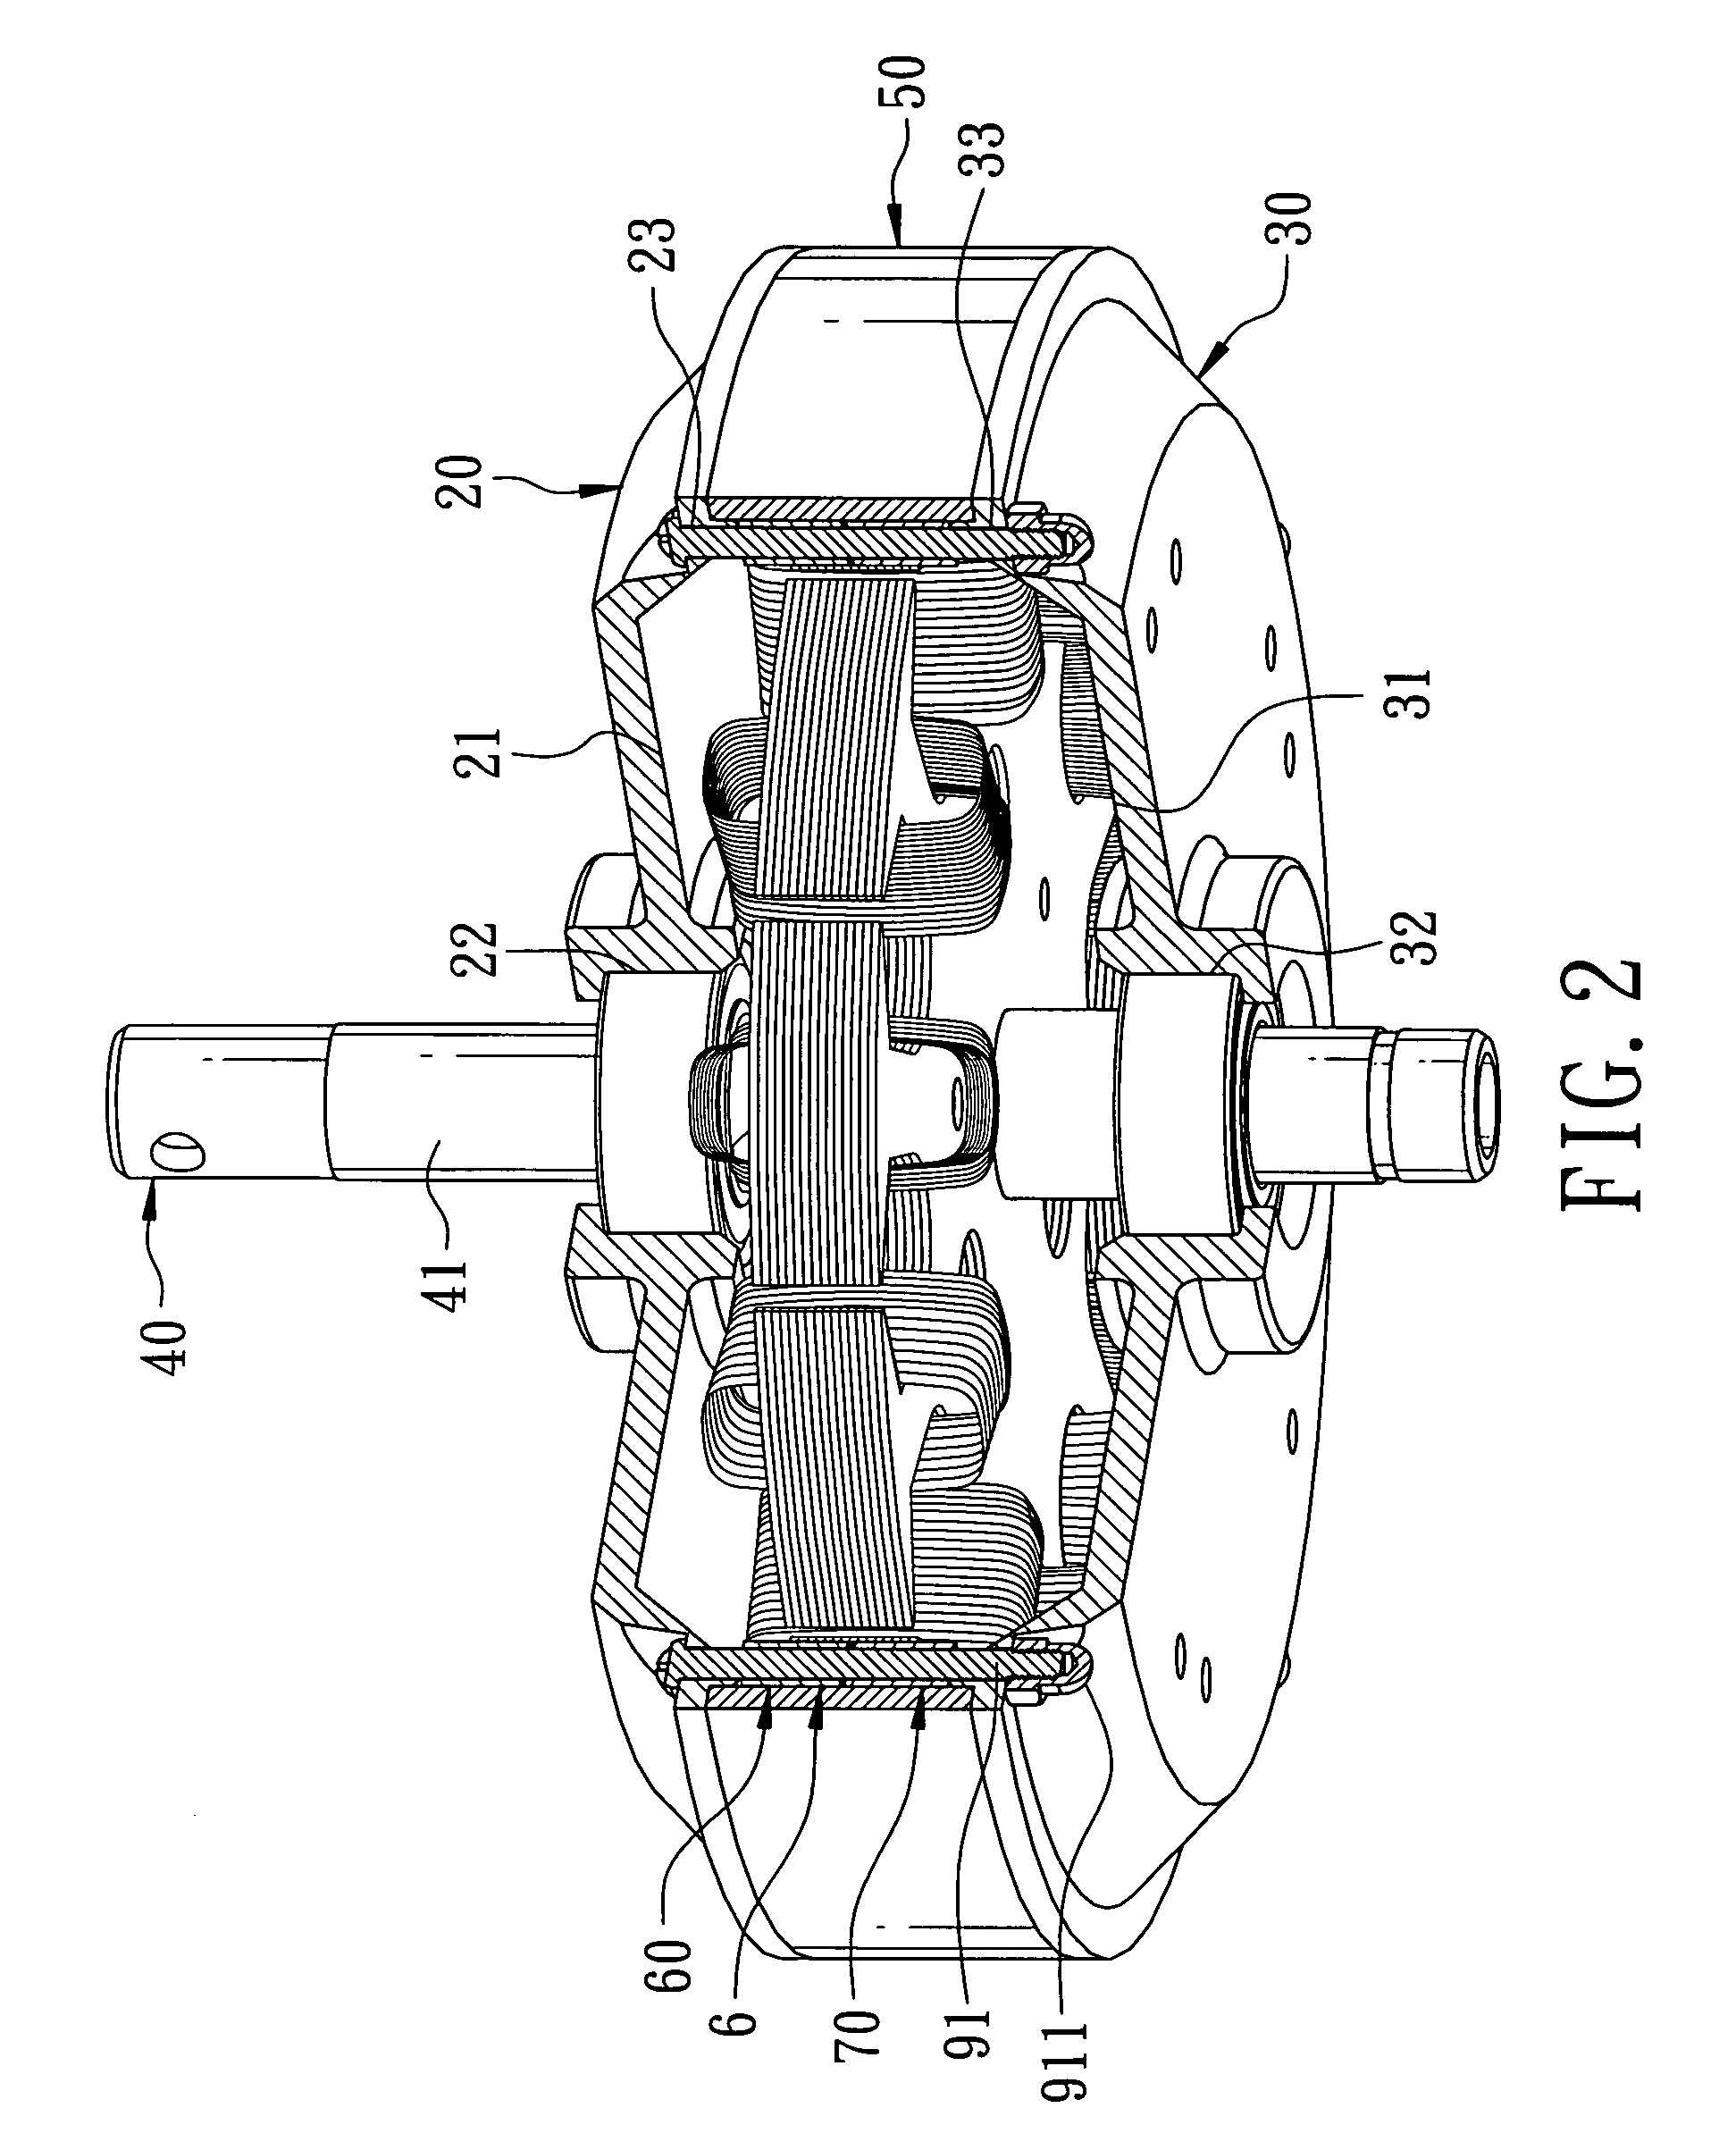 Motor magnet fixing device